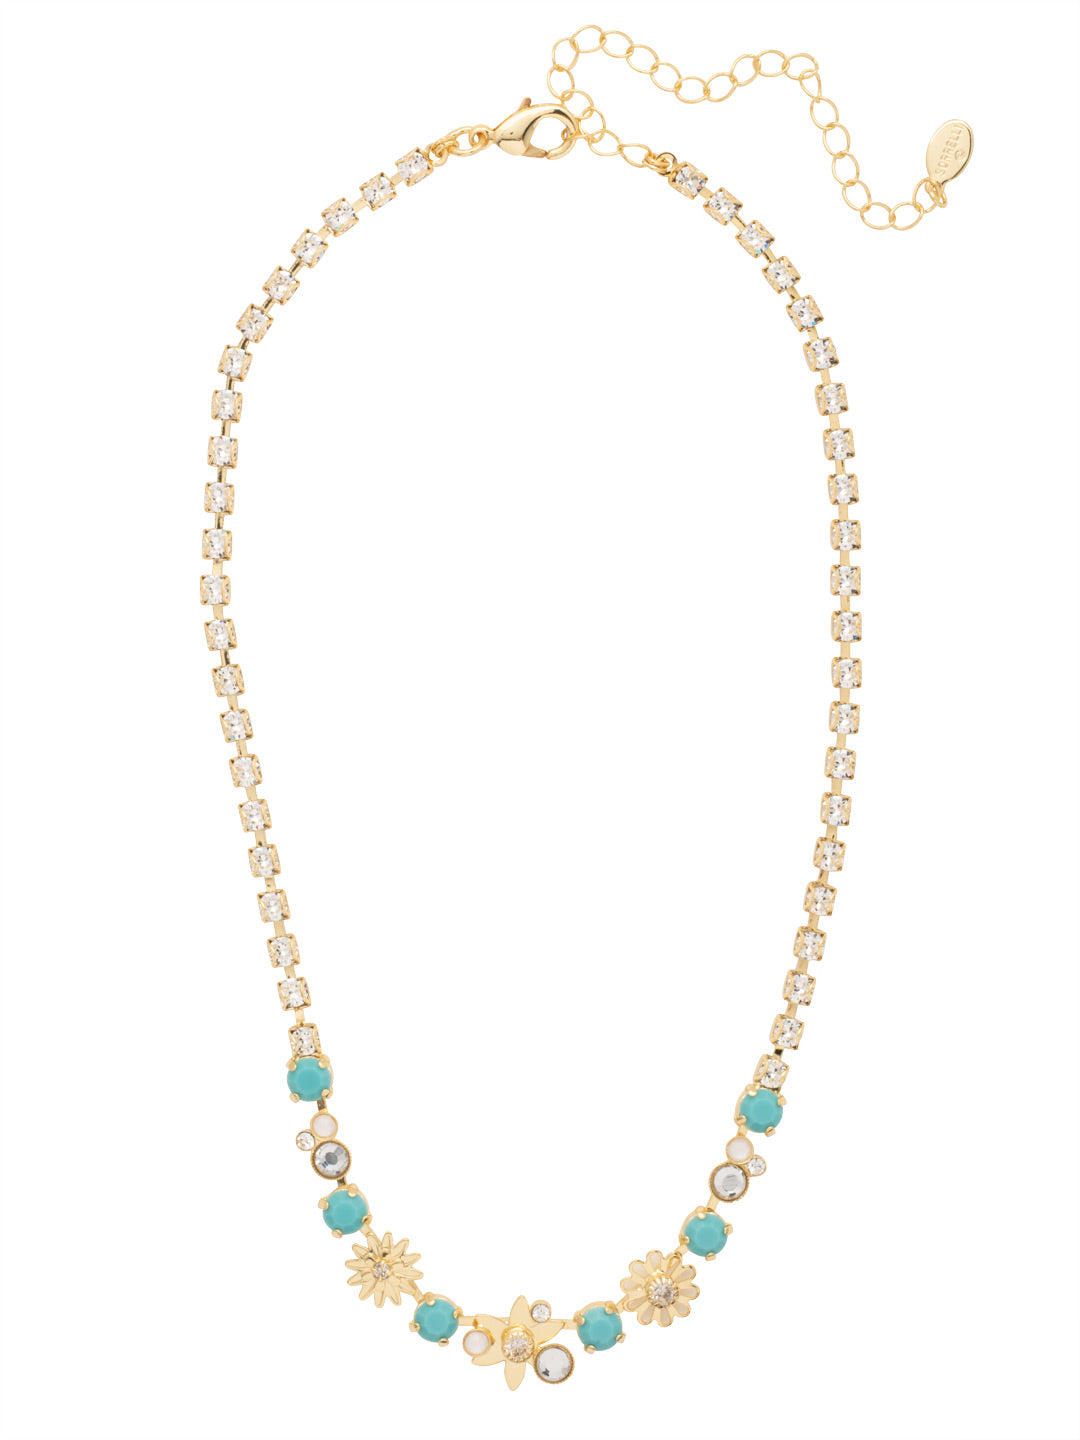 Roseanne Tennis Necklace - NEV13BGSTO - <p>The Roseanne Tennis Necklace is a big sparkler. Floral metalwork stands out on a strand entirely lined in round, sparkling crystals. You're sure to stand out in this one. From Sorrelli's Santorini collection in our Bright Gold-tone finish.</p>